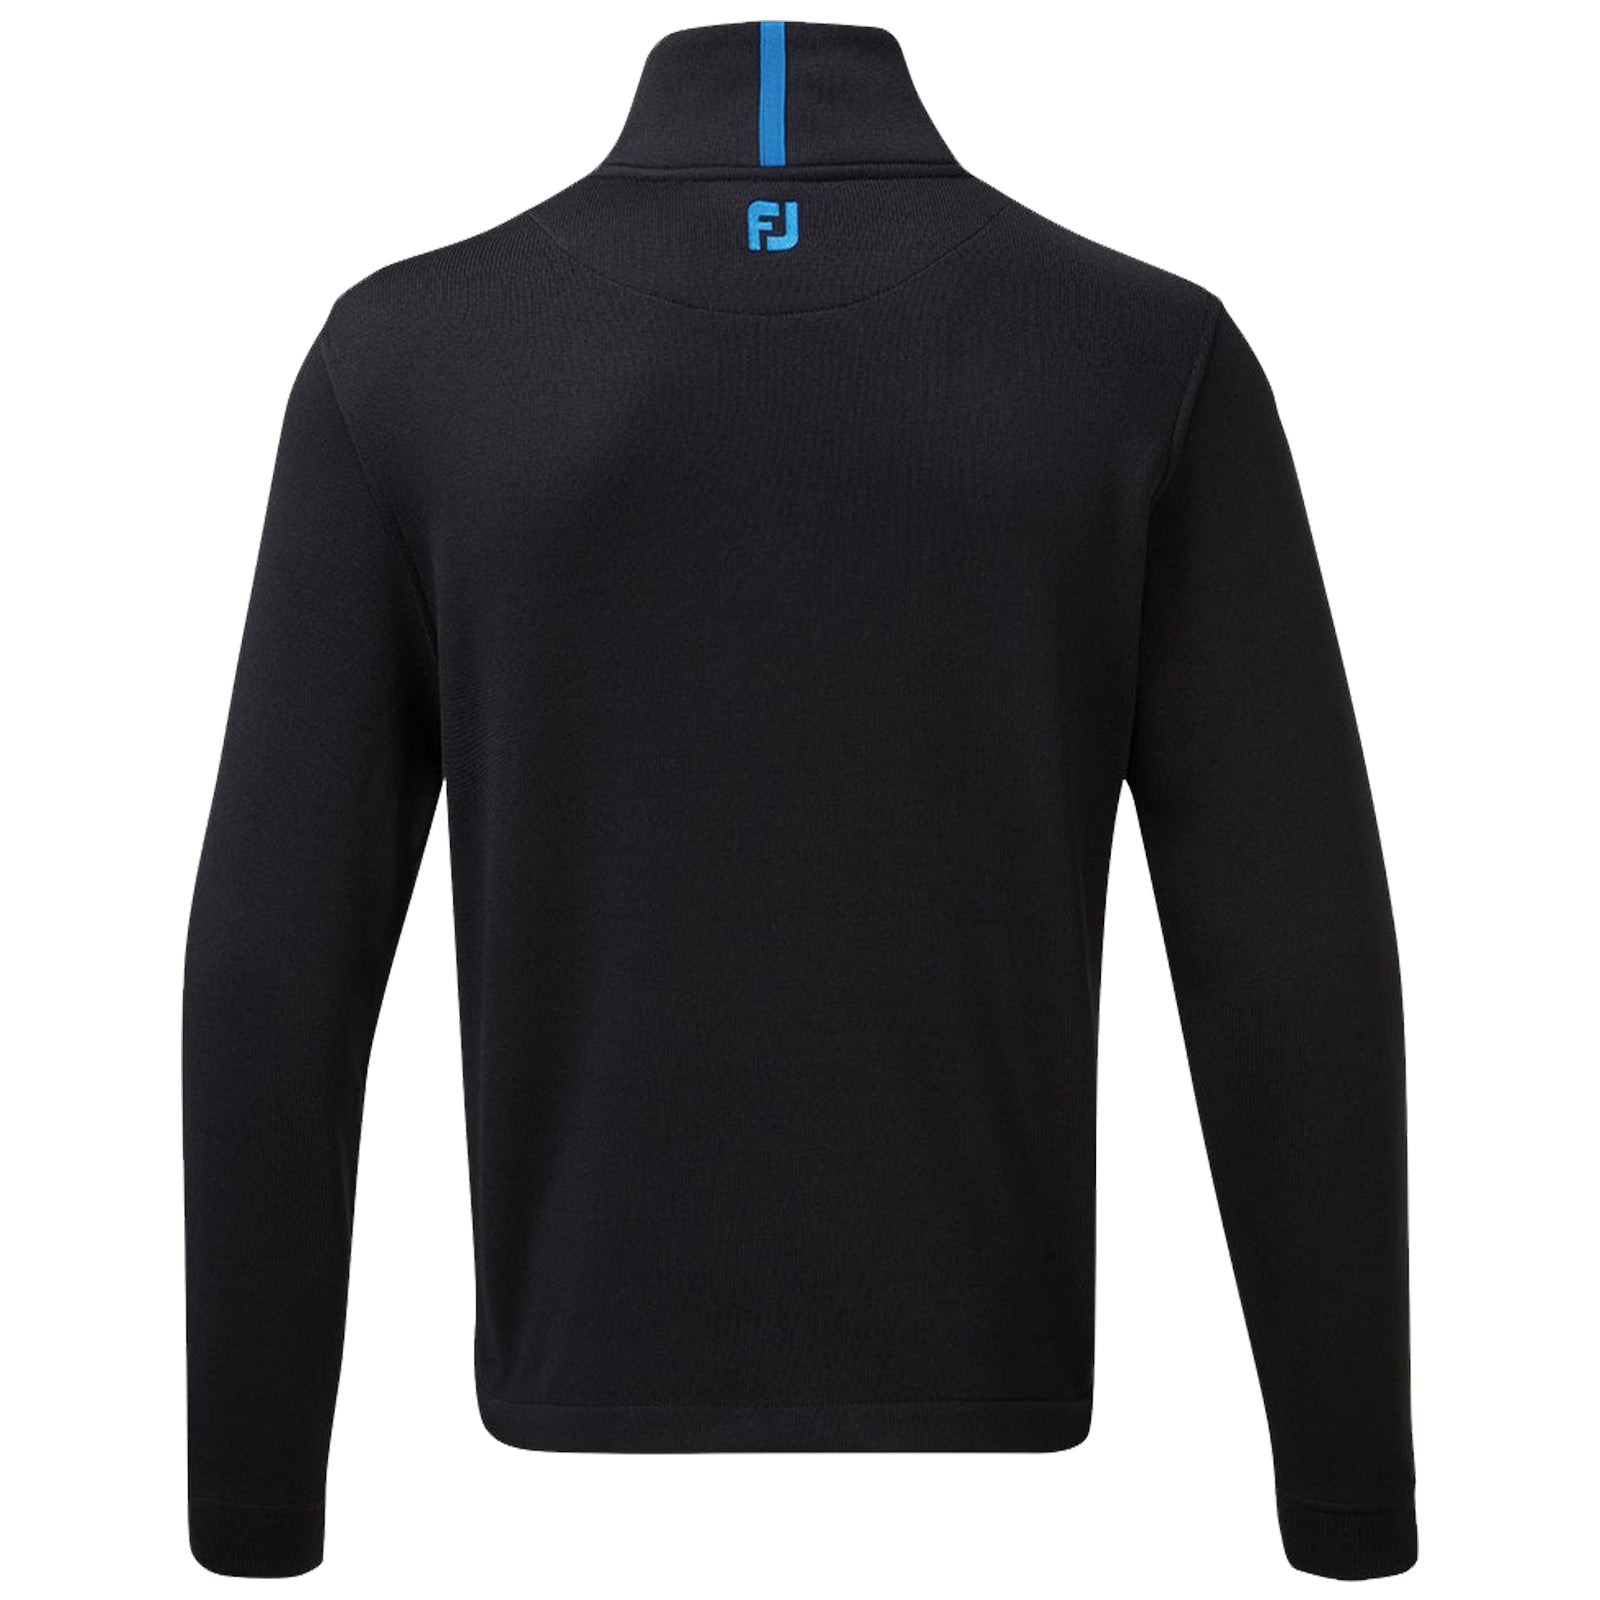 FootJoy Mens Chill-Out Xtreme Half Zip Top S